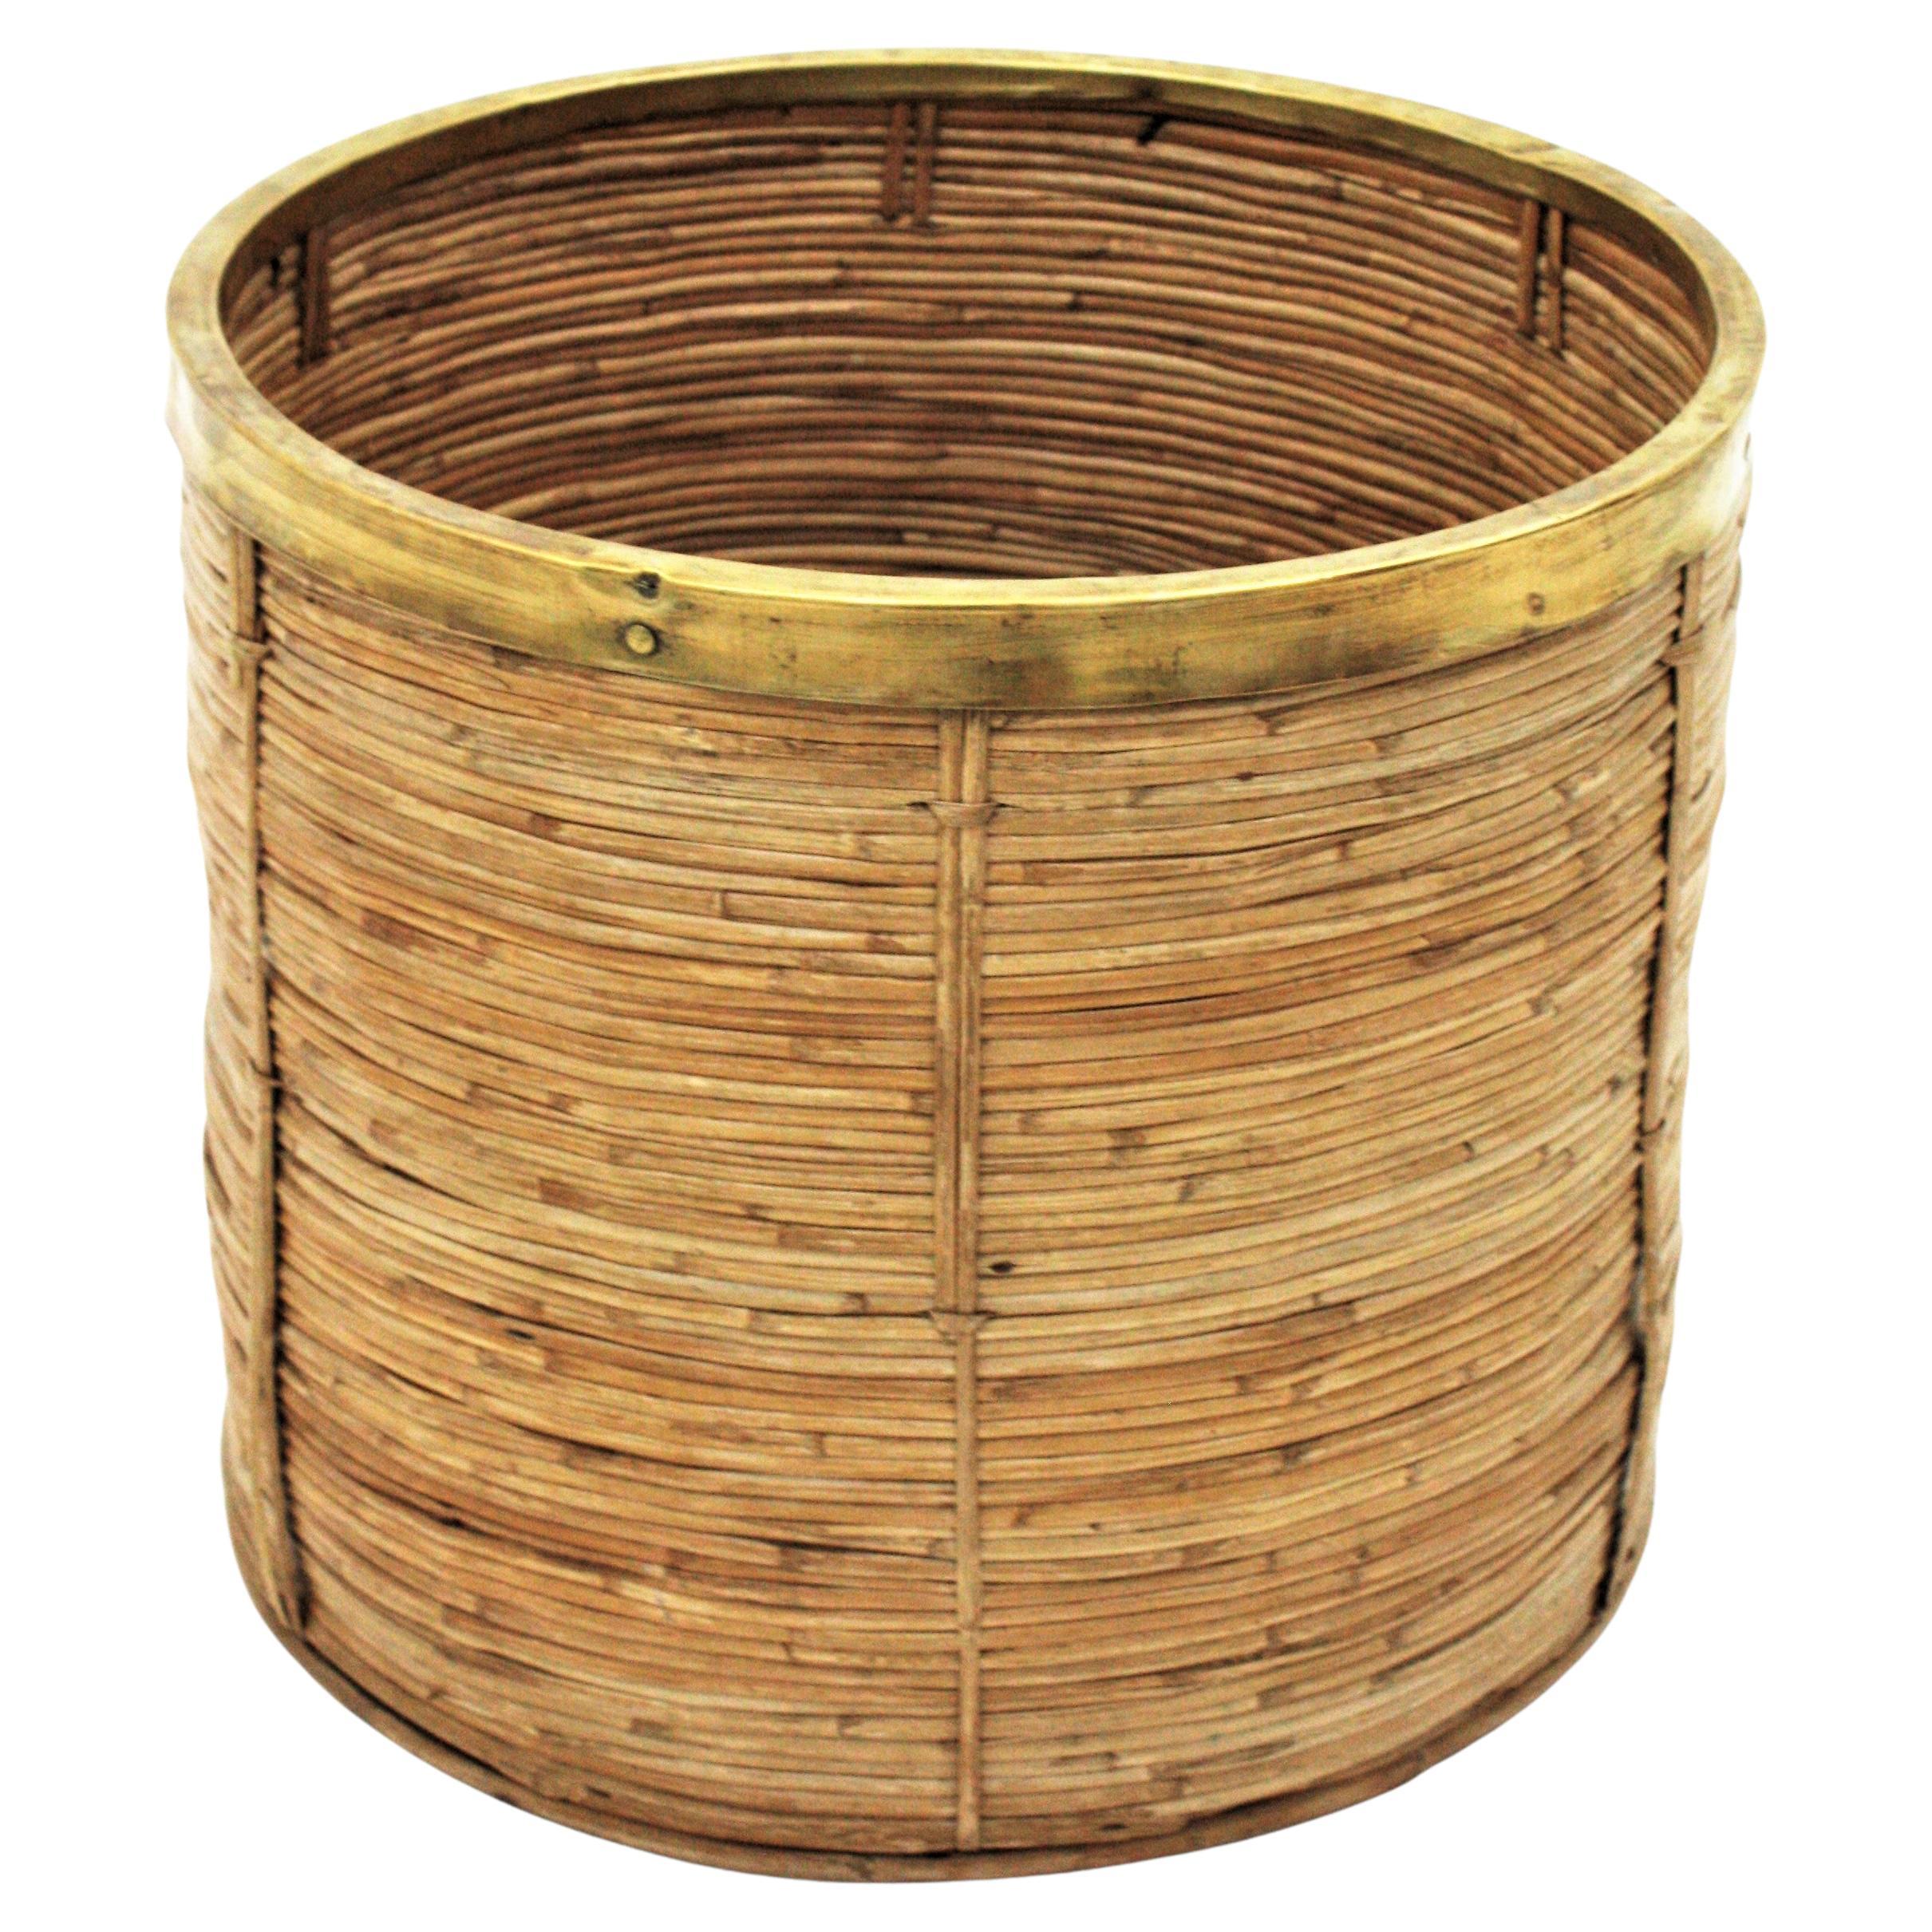 Mid-Century Modern decorative rattan and brass planter or basket. Handcrafted in Italy, 1970s.
Round shape with gilded brass rim. Handcrafted inspired by Gabriella Crespi designs.
It can be used as planter, storage basket or paper bin.
Plants not